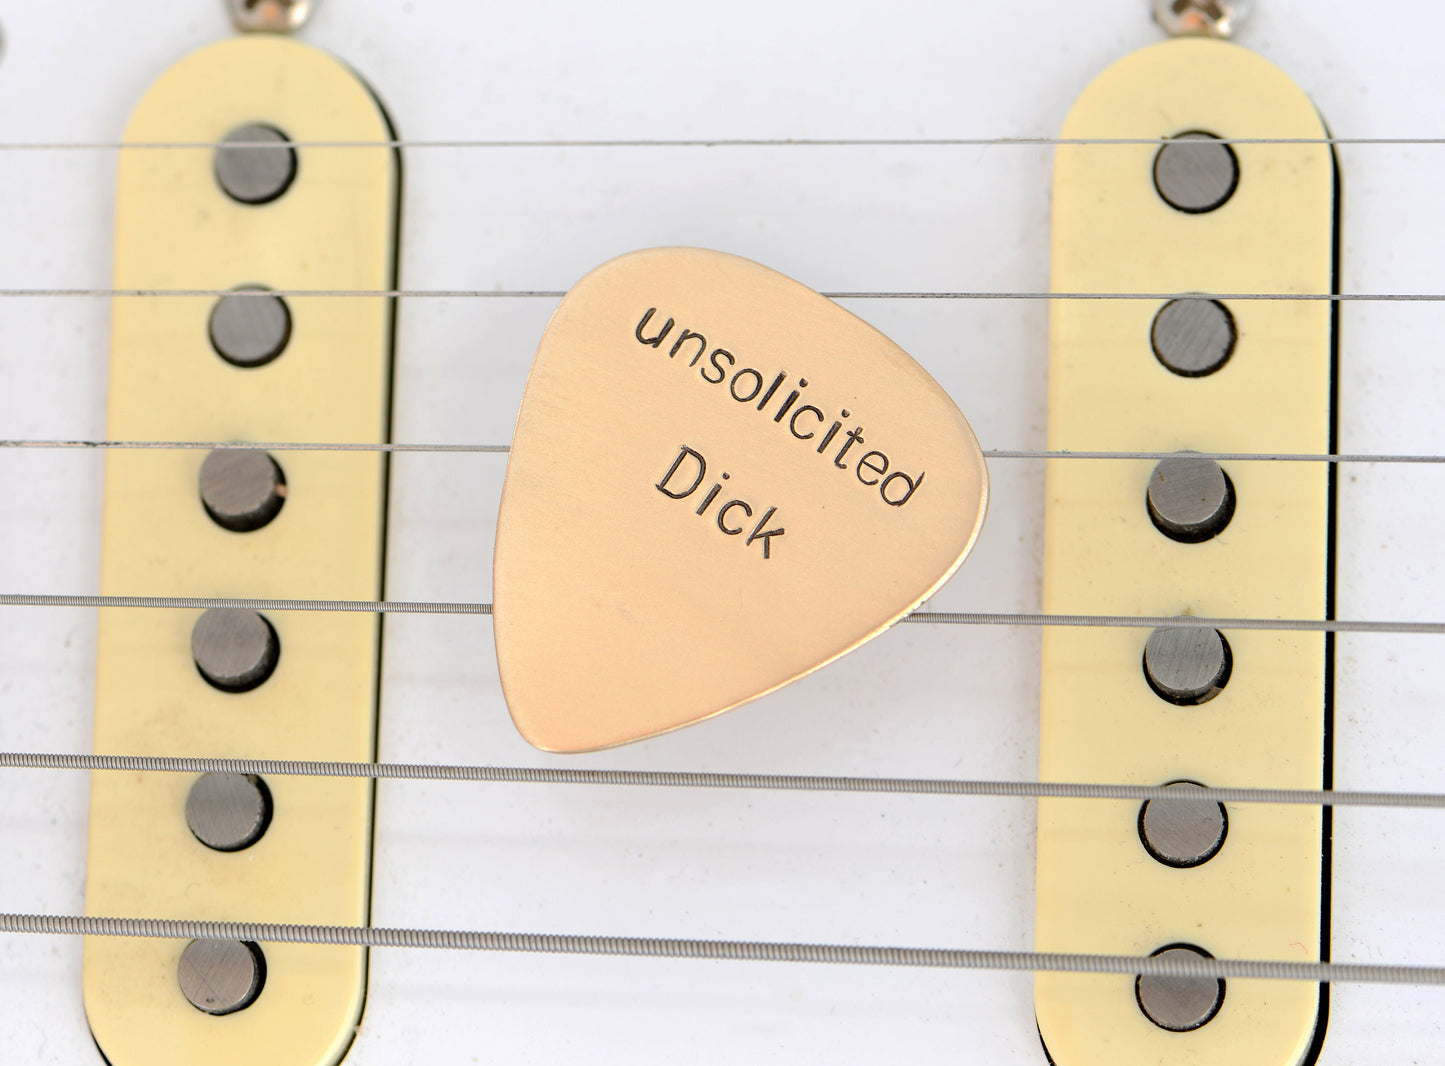 Unsolicited Dick Pick - Guitar Pick in Bronze